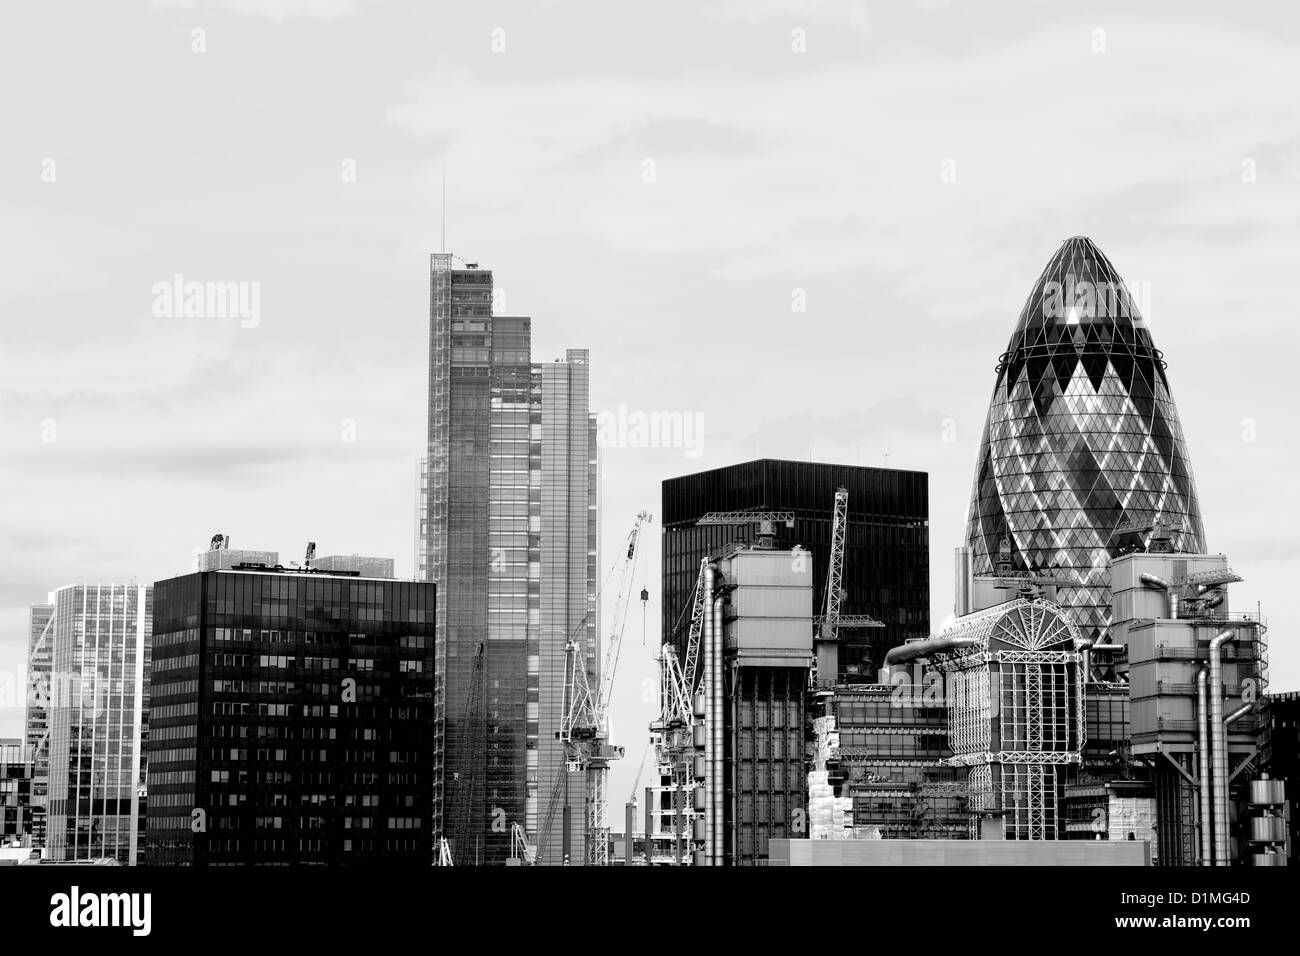 The City of London or financial district skyline, London, UK Stock Photo